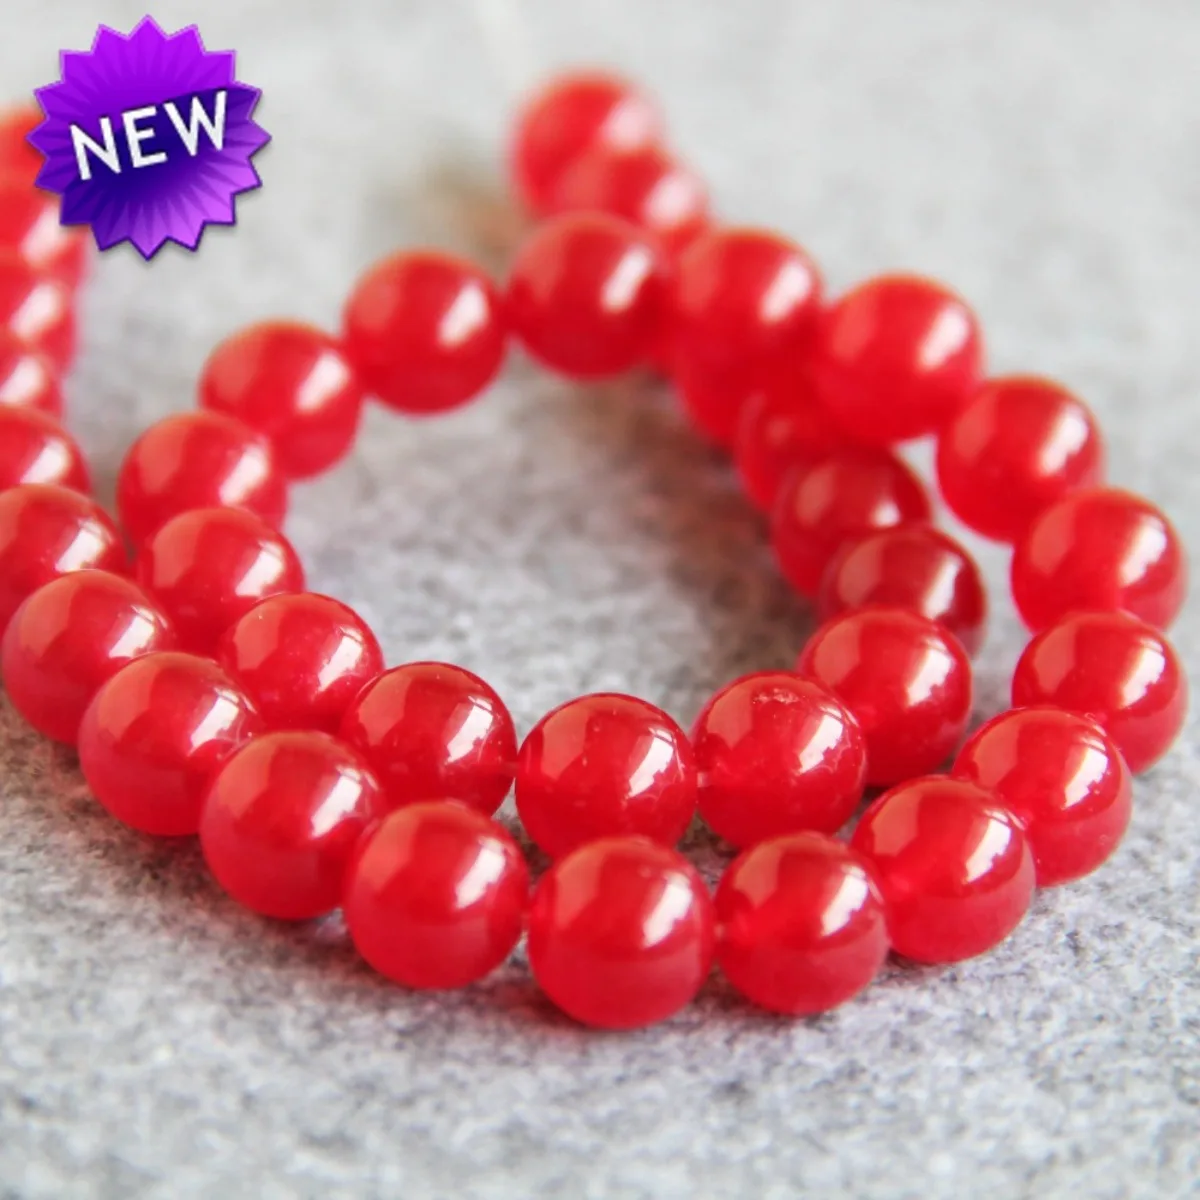 

10mm Red Chalcedony Jade Round Semi Finished Stone Balls Loose Beads DIY 15inch Jewelry Making Accessory for Necklace Bracelet